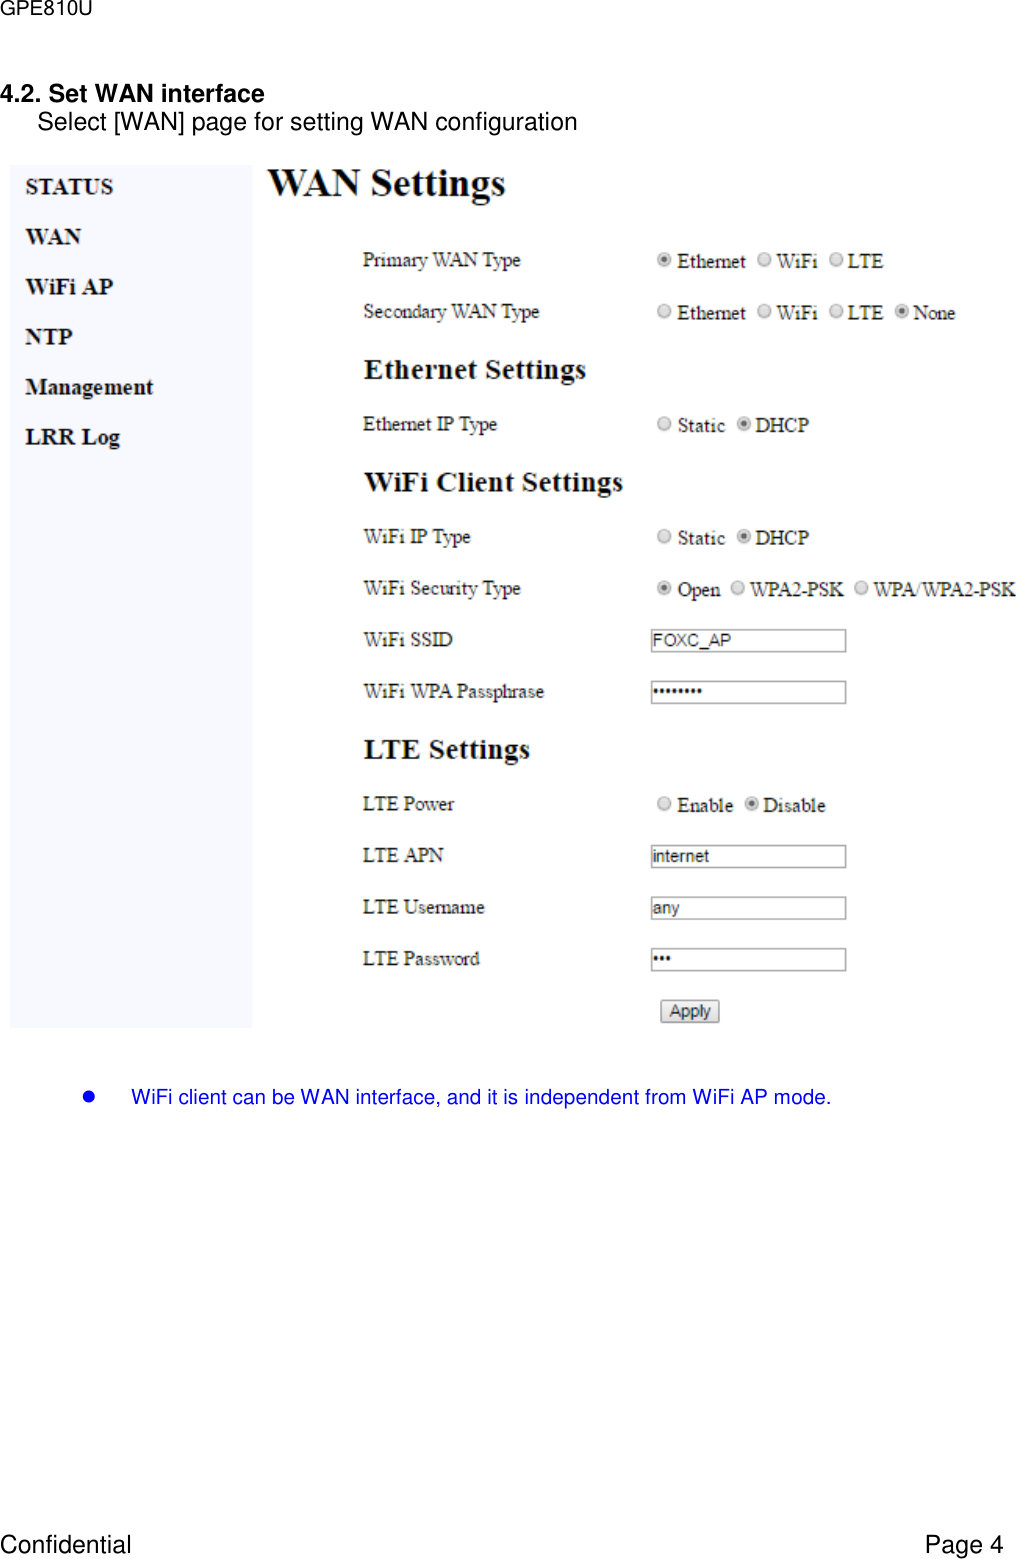 GPE810U Confidential  Page 4  4.2. Set WAN interface Select [WAN] page for setting WAN configuration              WiFi client can be WAN interface, and it is independent from WiFi AP mode. 